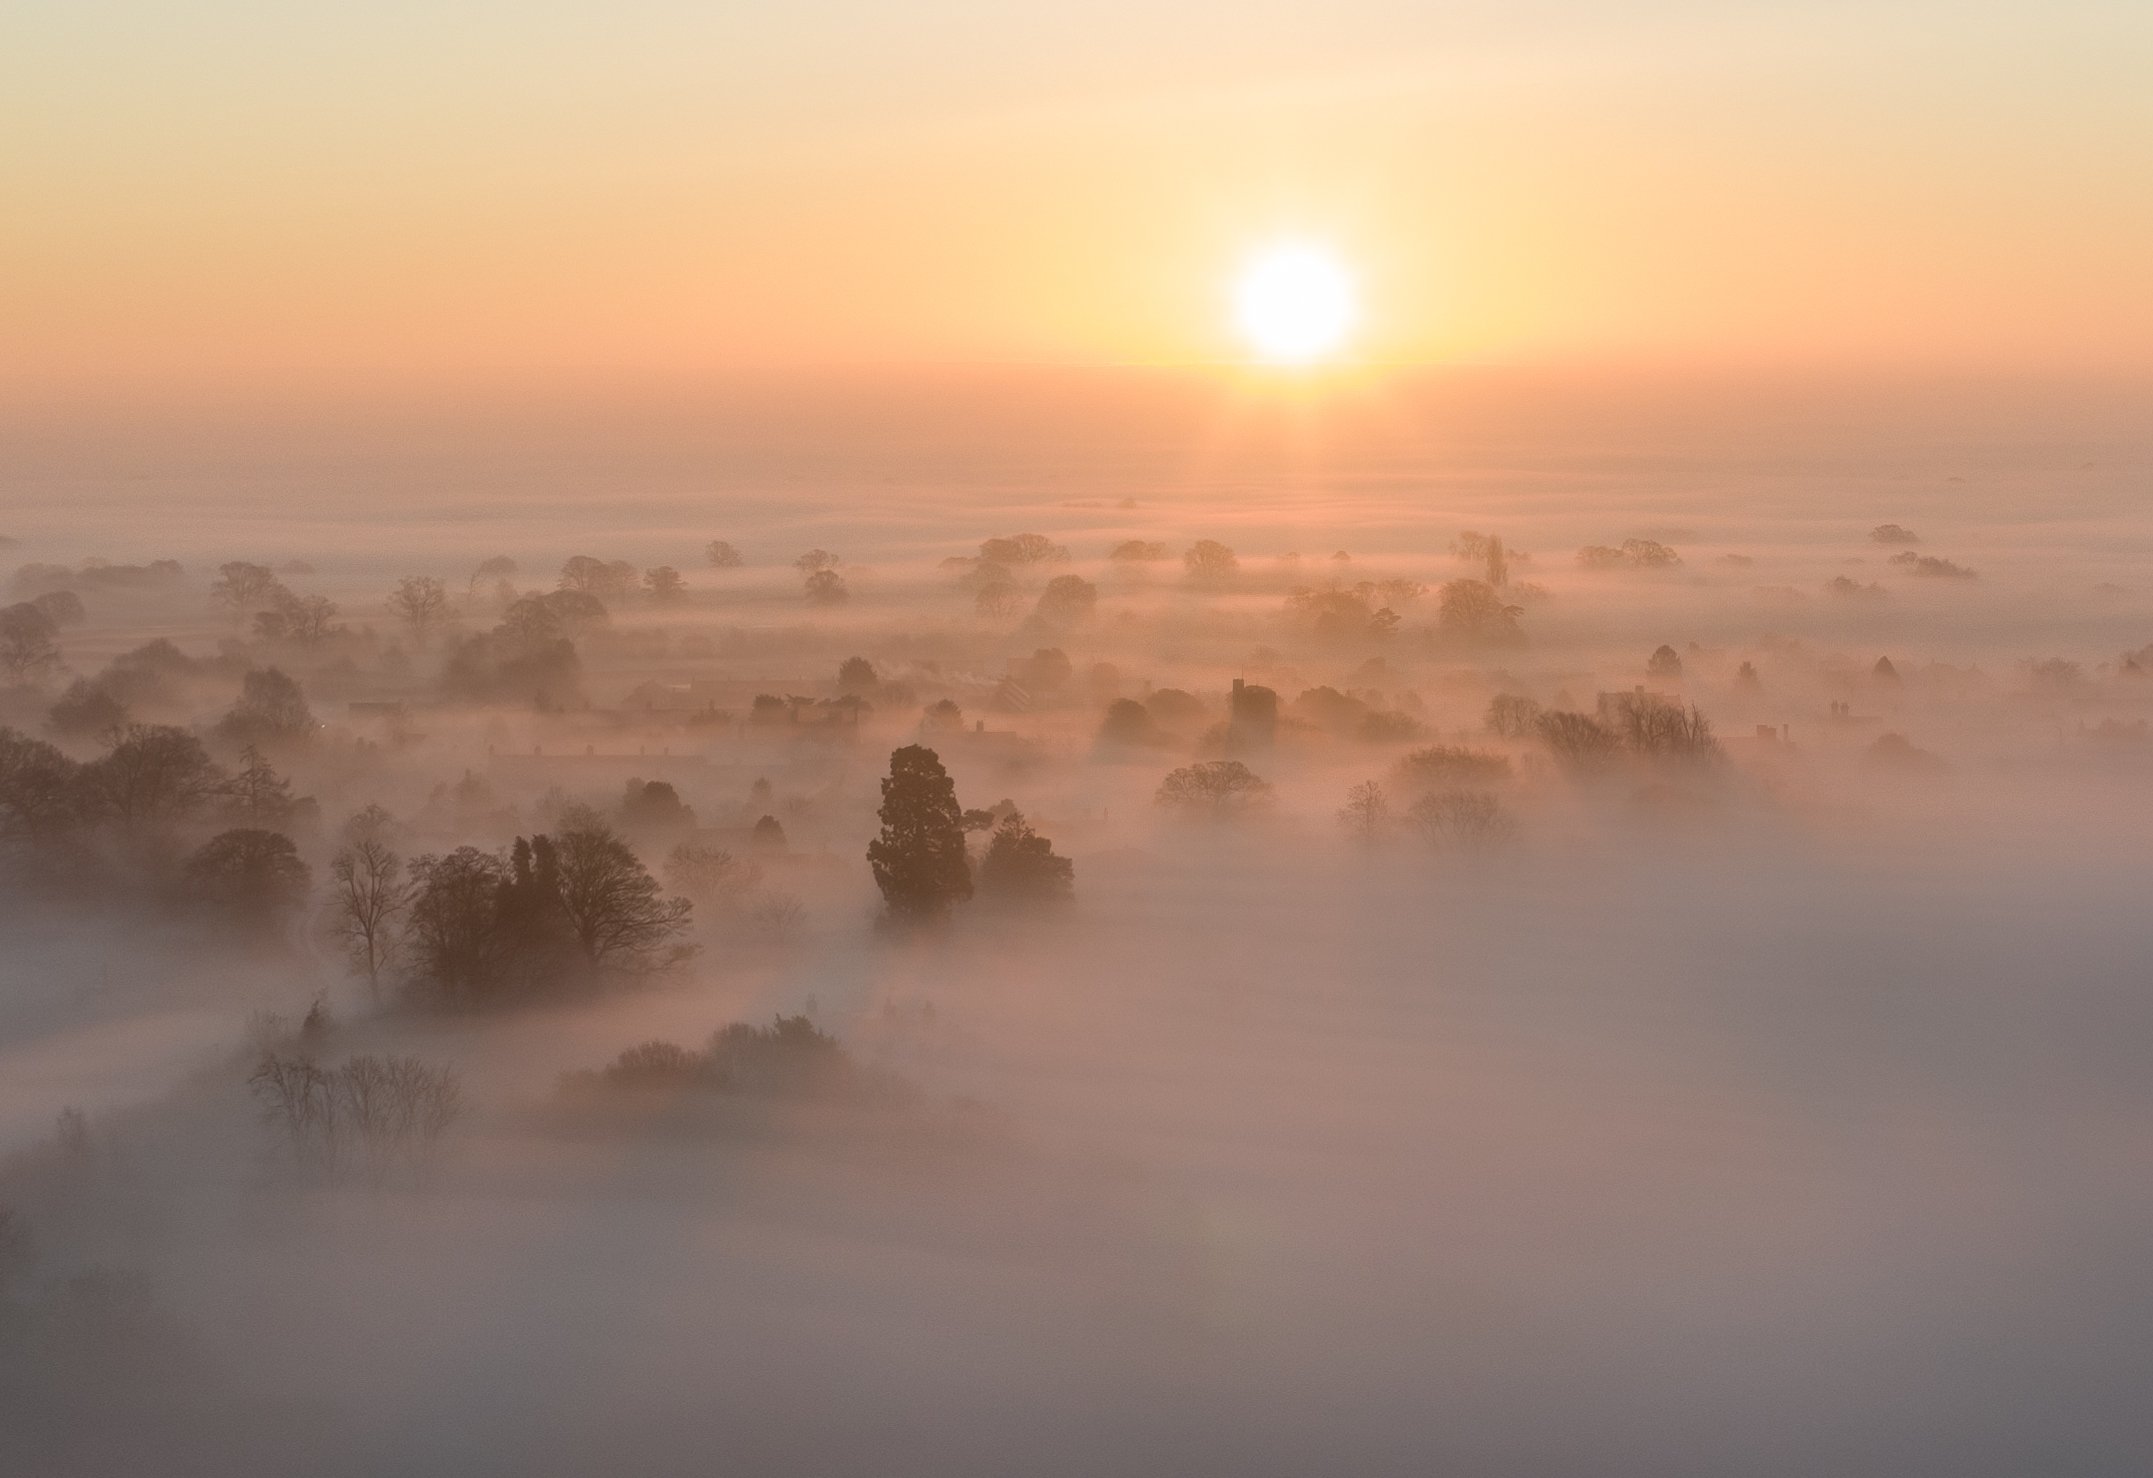 1st Place Over the fog of Oswestry by Carl Edwards @Carlsphotos1982